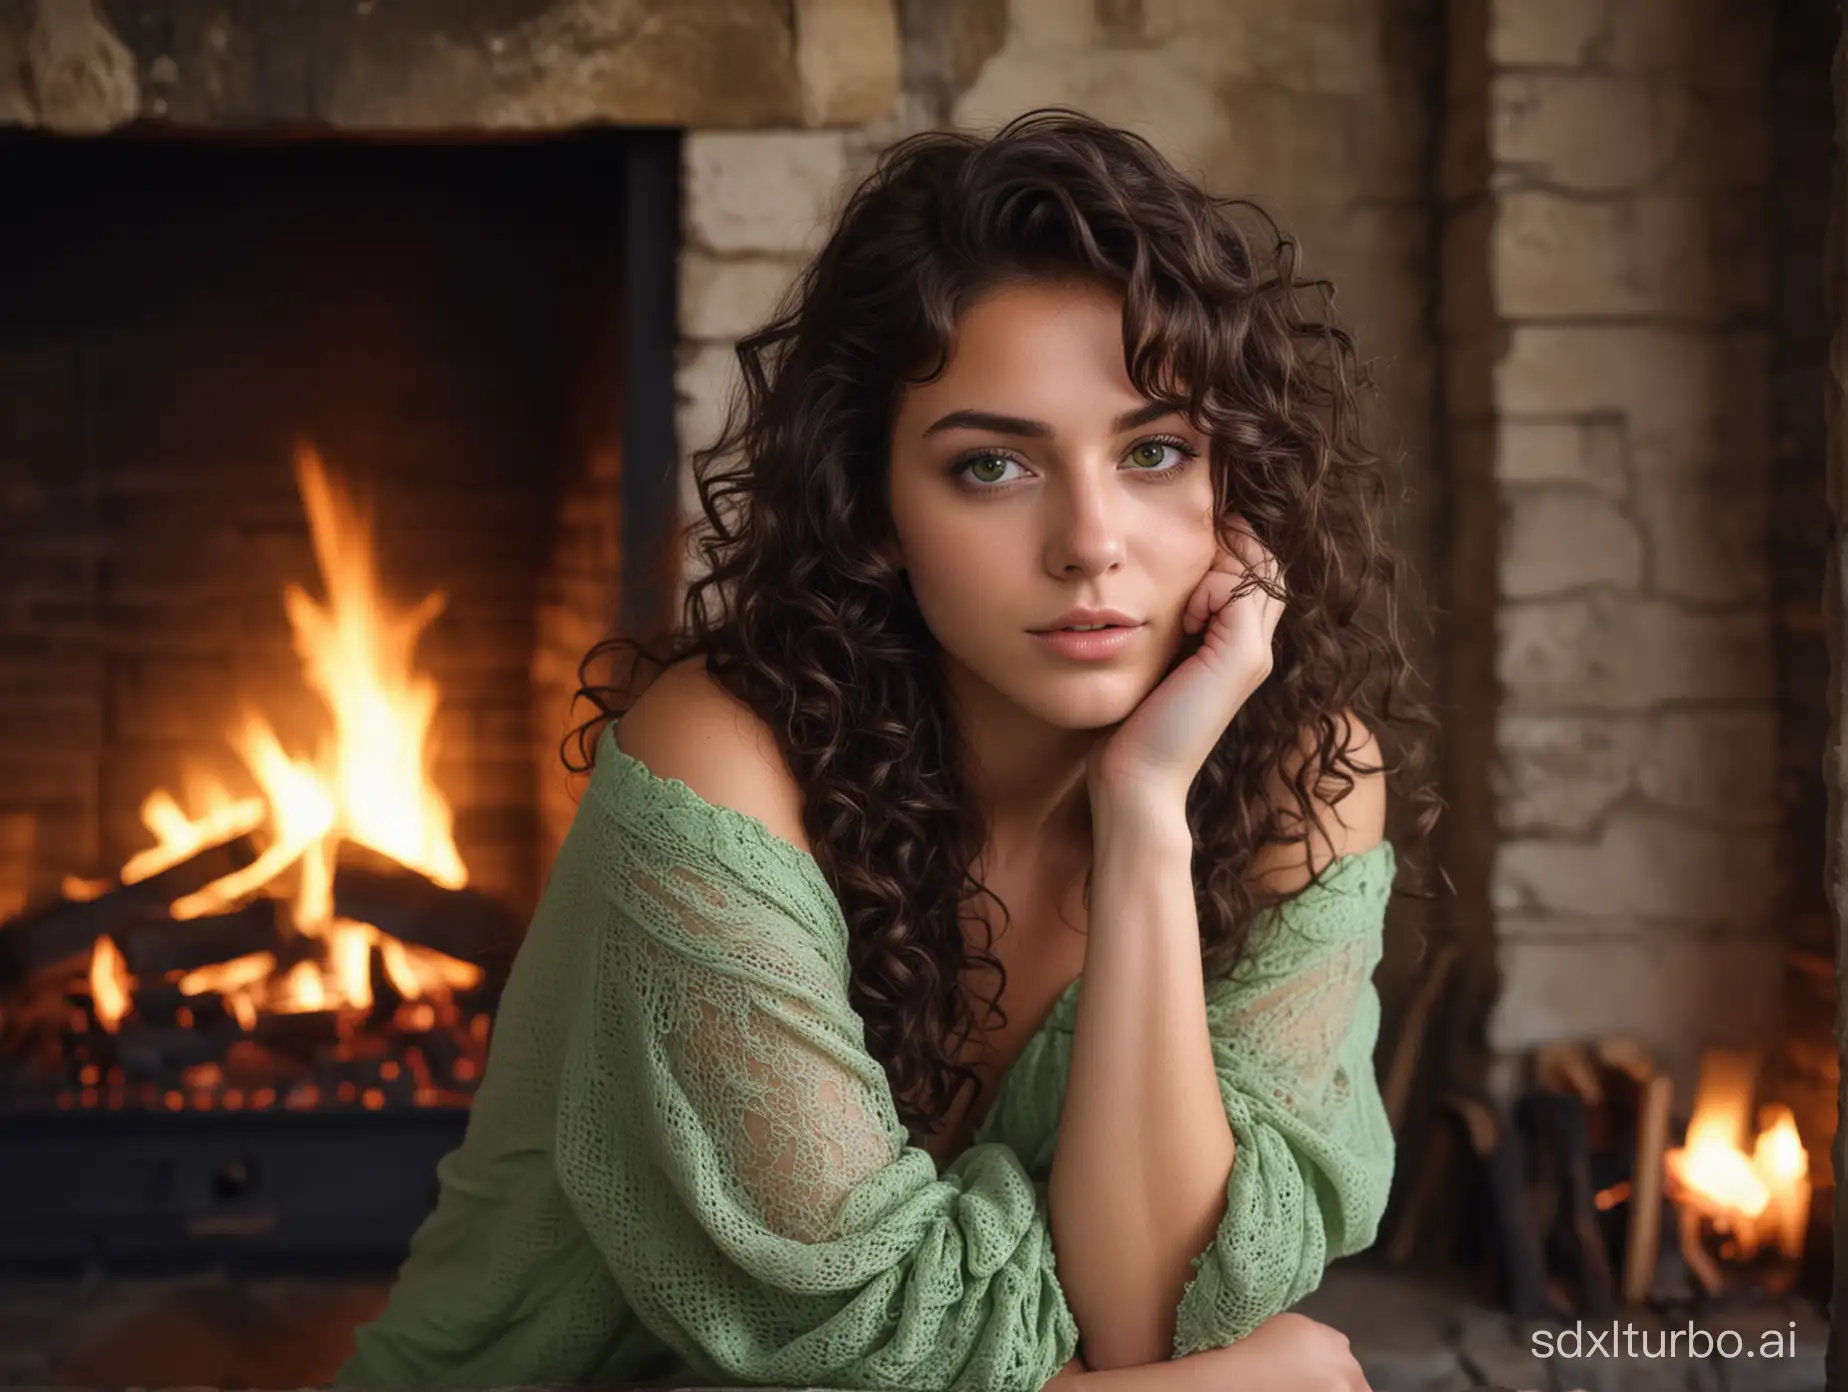 Dreamy-Atmosphere-Young-Woman-with-Green-Eyes-by-the-Fireplace